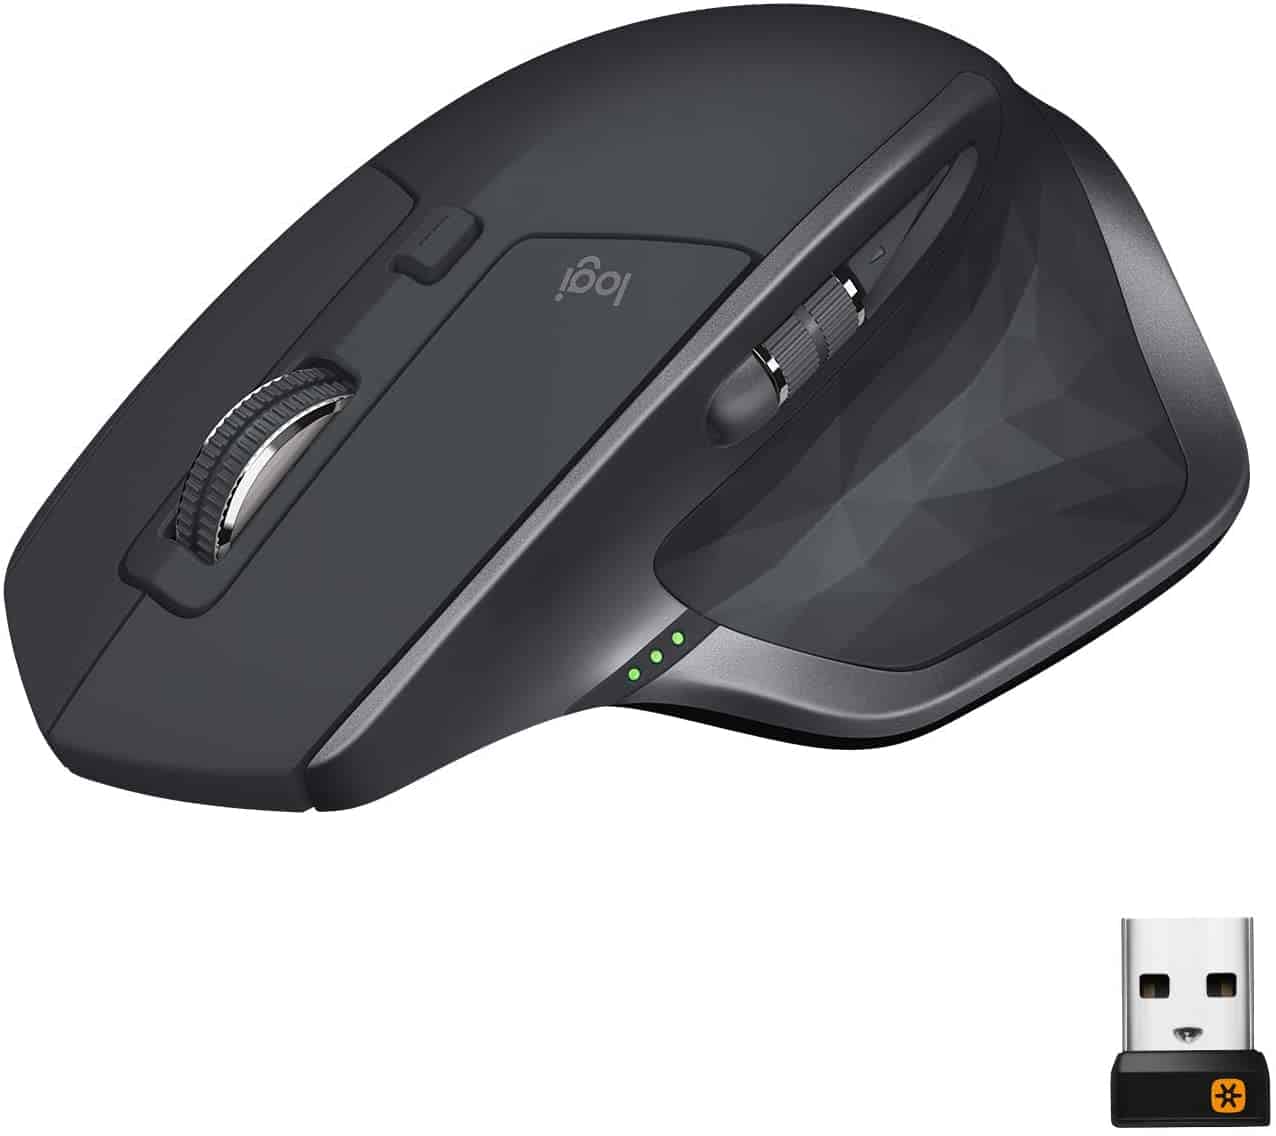 Deal Alert: Logitech MX Master 2S Wireless Mouse down to its lowest price — again!